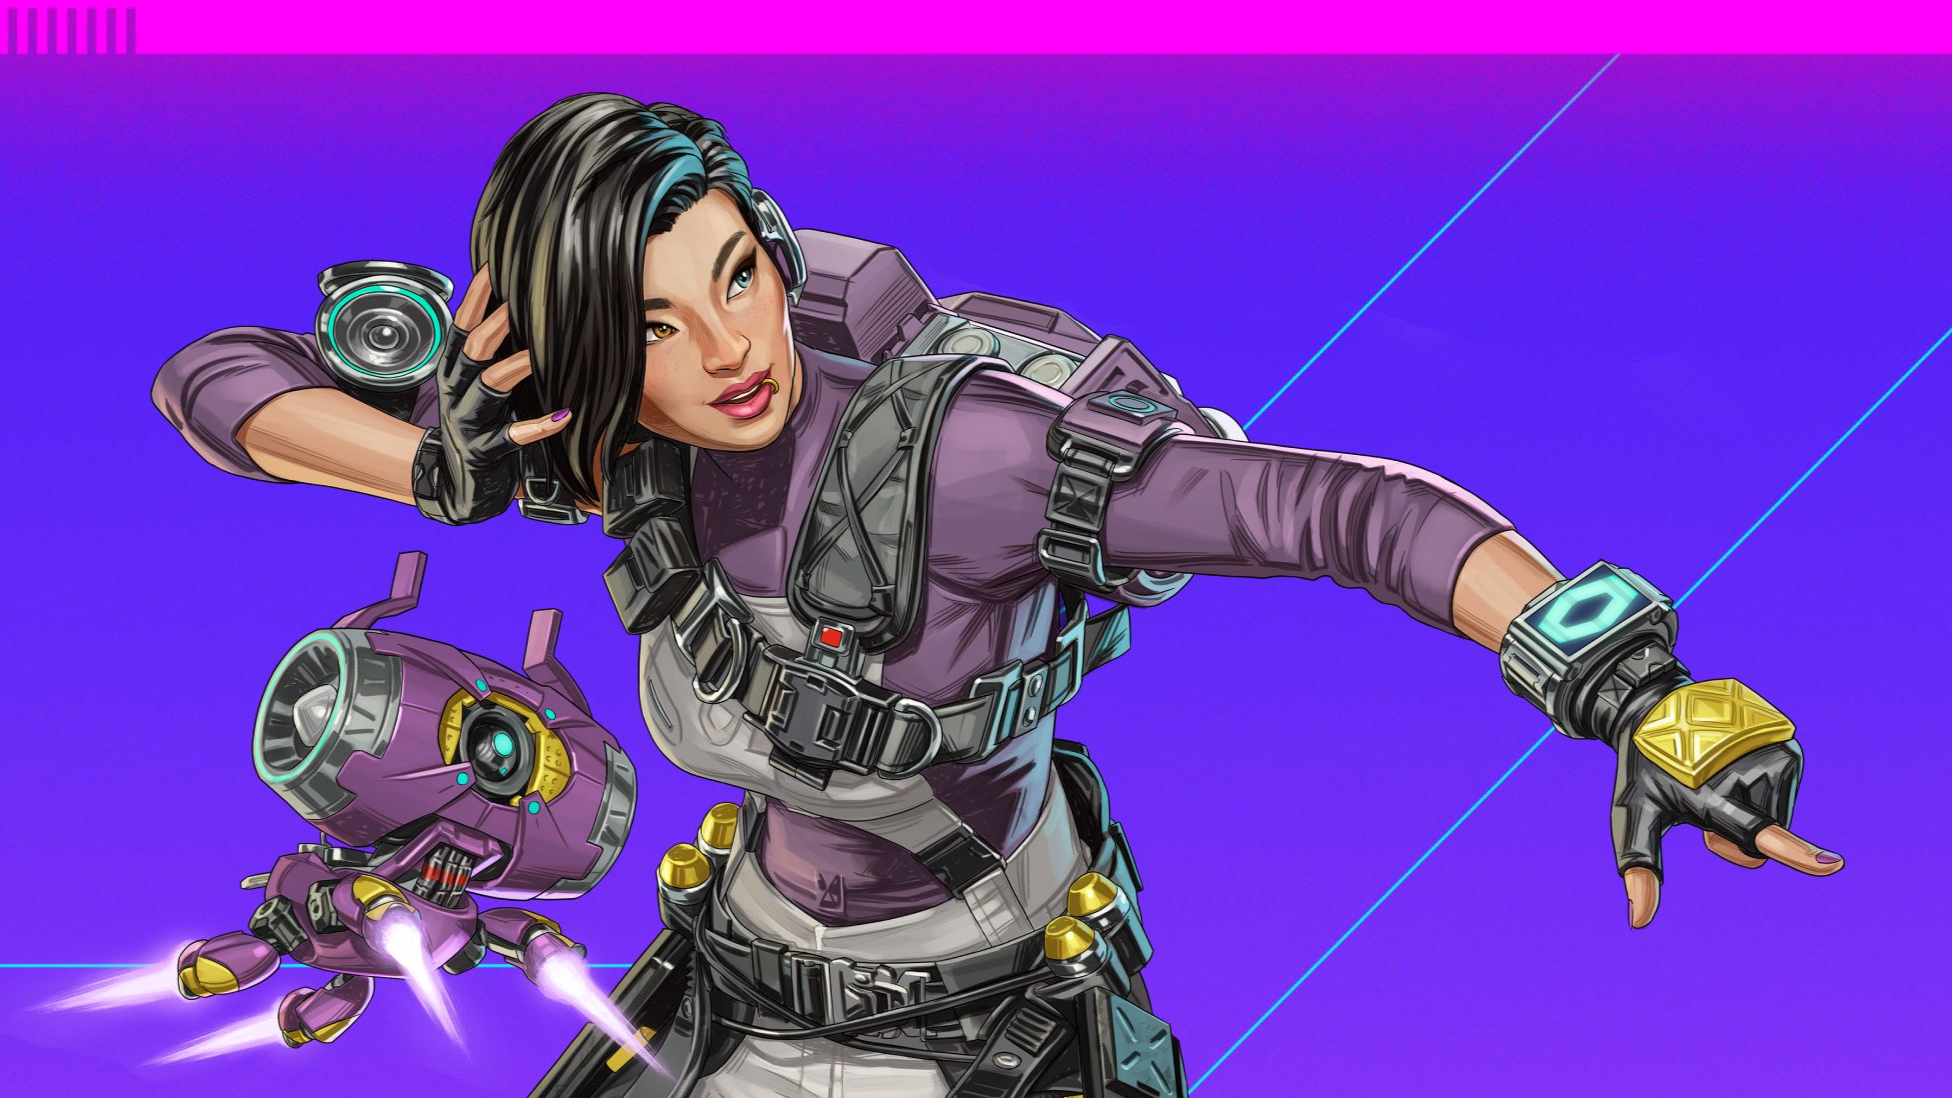 Apex Legends Mobile's Season 2 Update, and Second Mobile-First